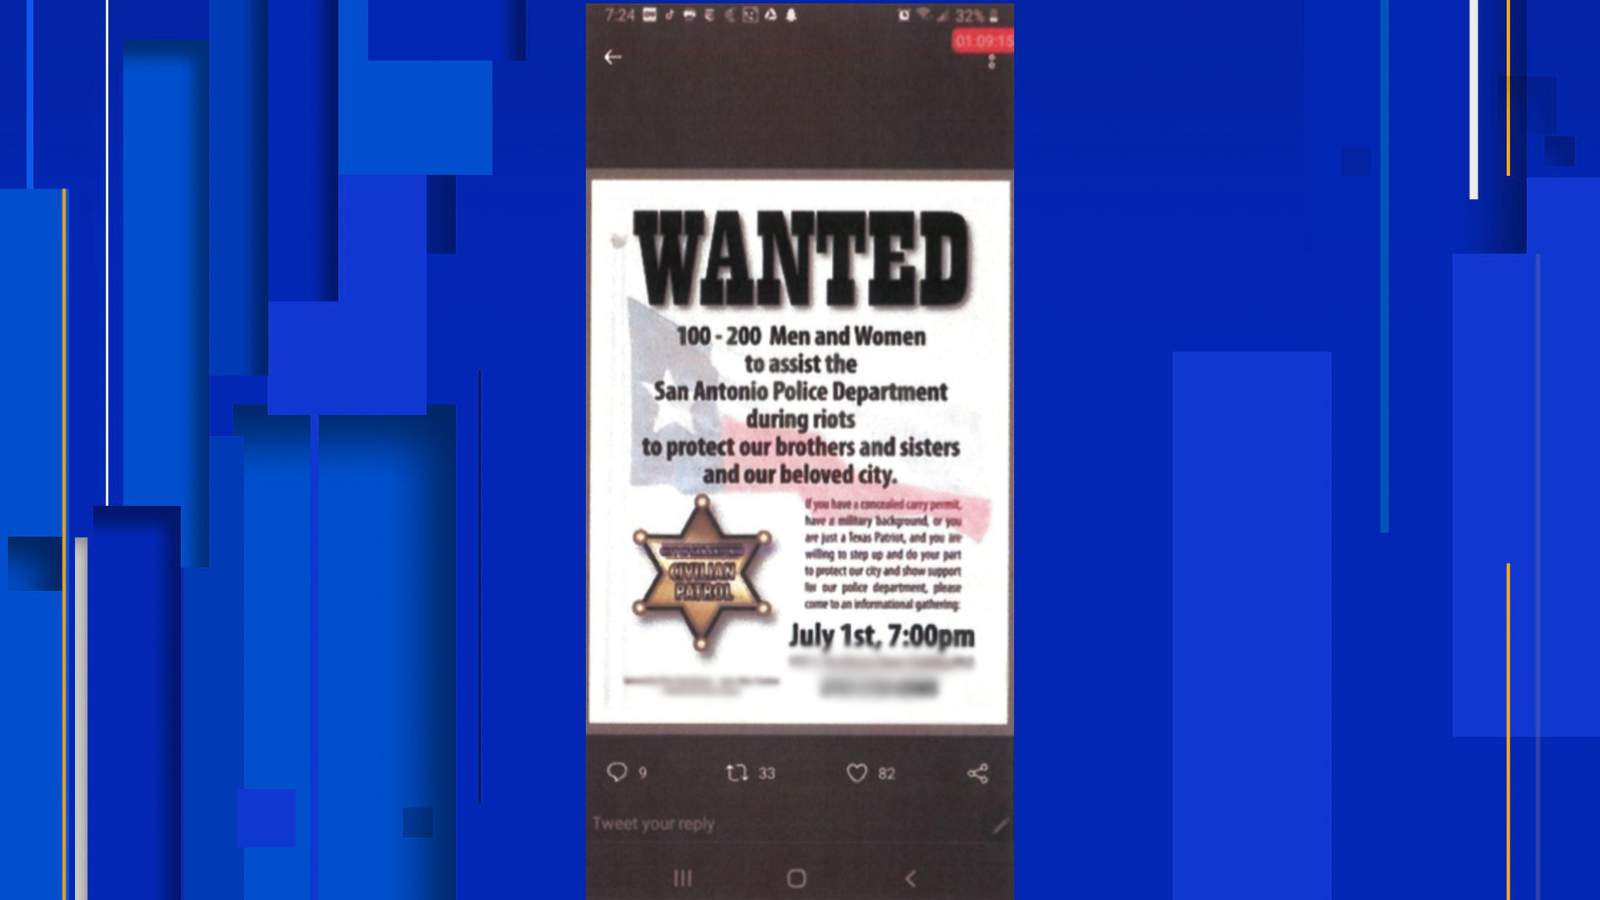 City of San Antonio calls on sign company to stop purported volunteer recruitment for SAPD